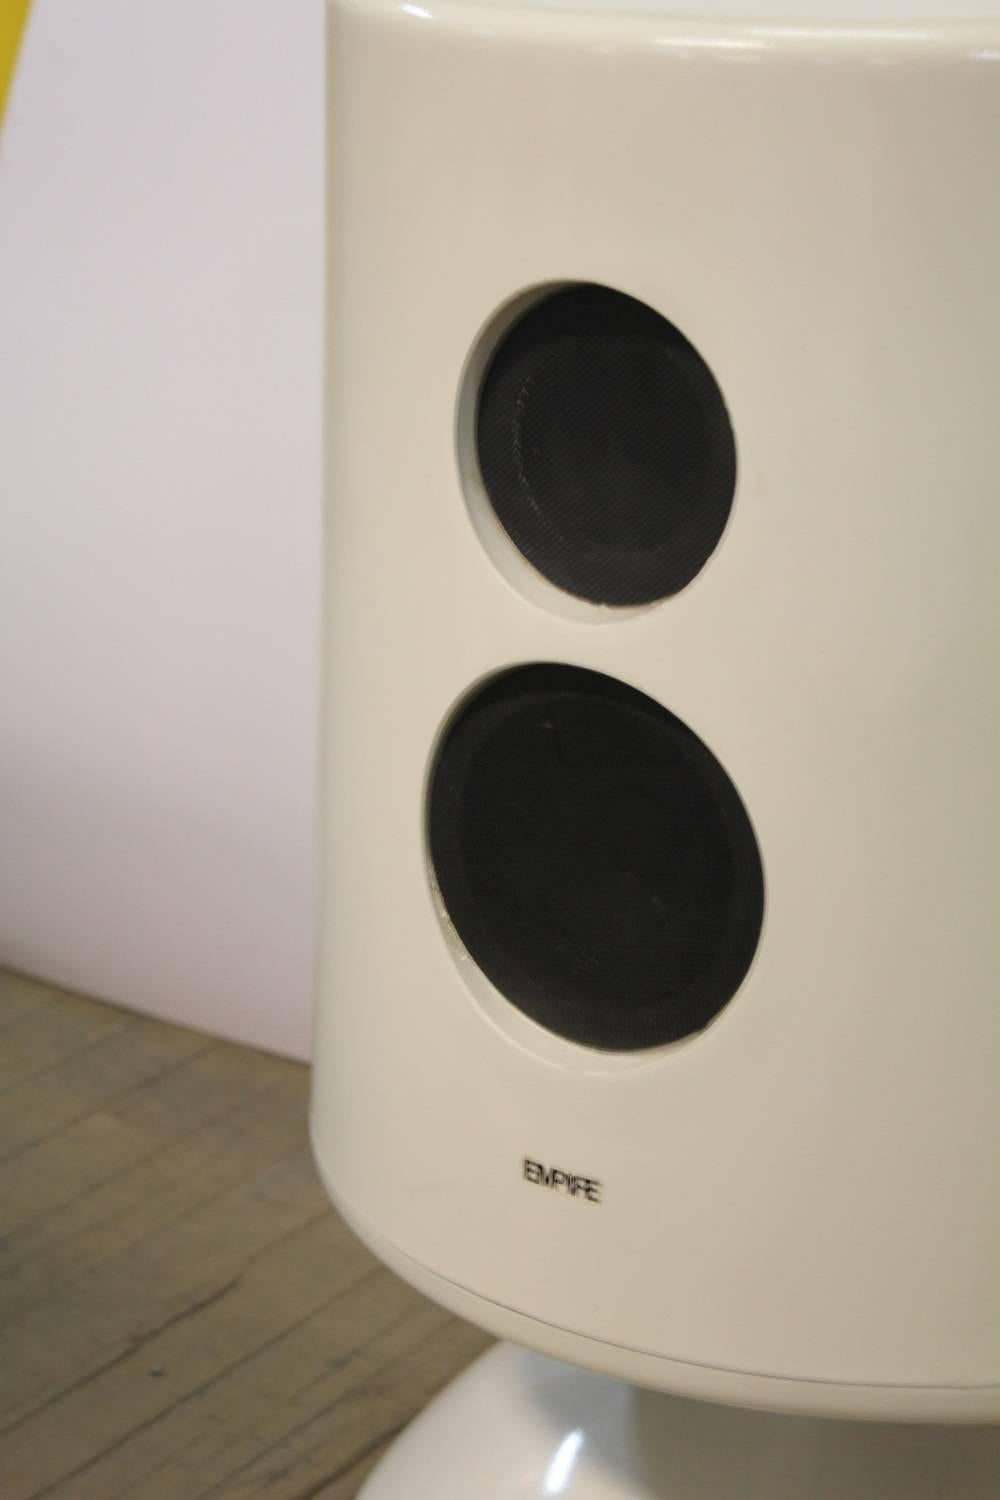 Midcentury Space Age Jupiter 6500 Speakers By Empire NY. In working very good condition.